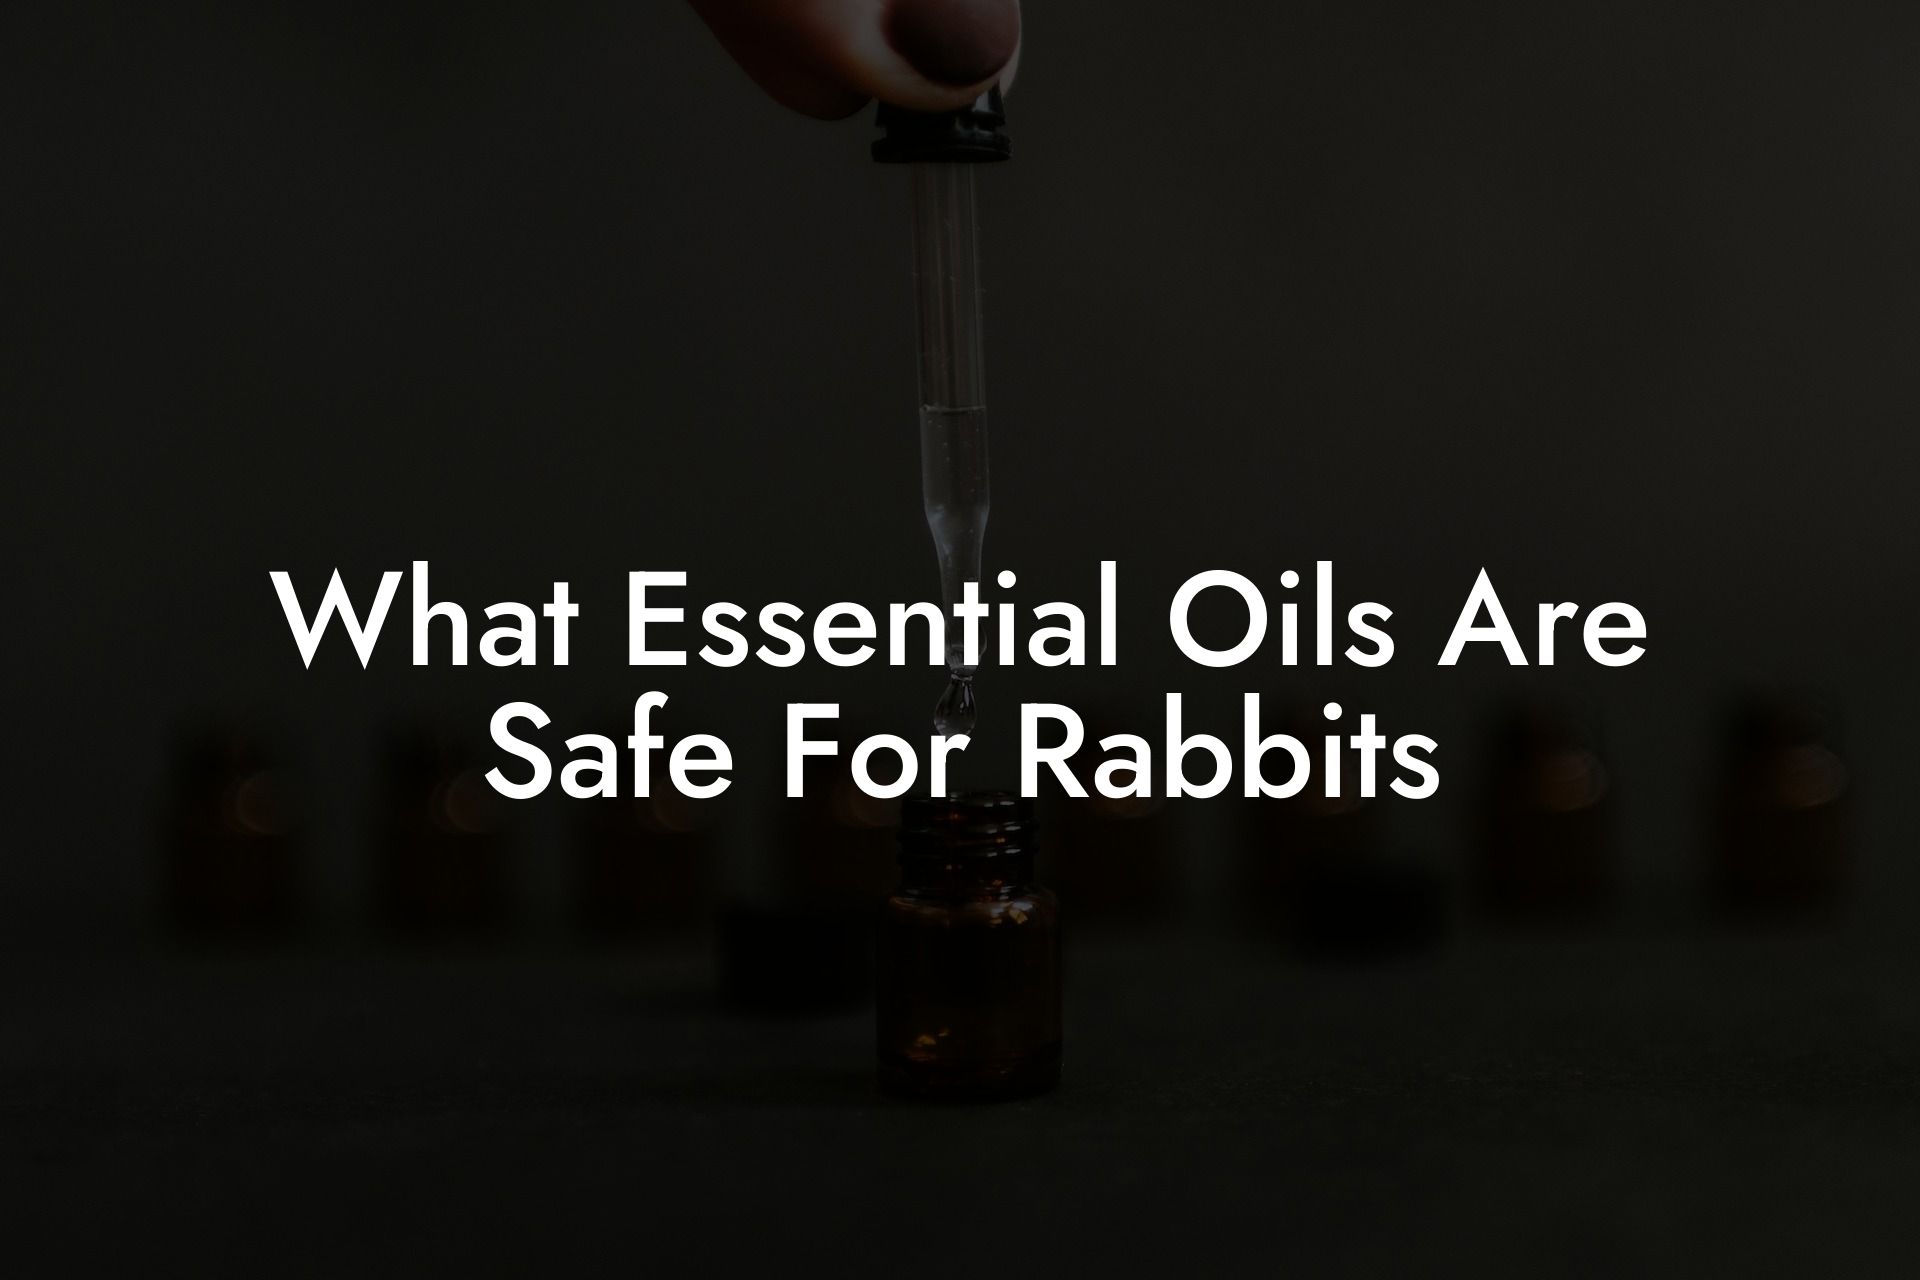 What Essential Oils Are Safe For Rabbits